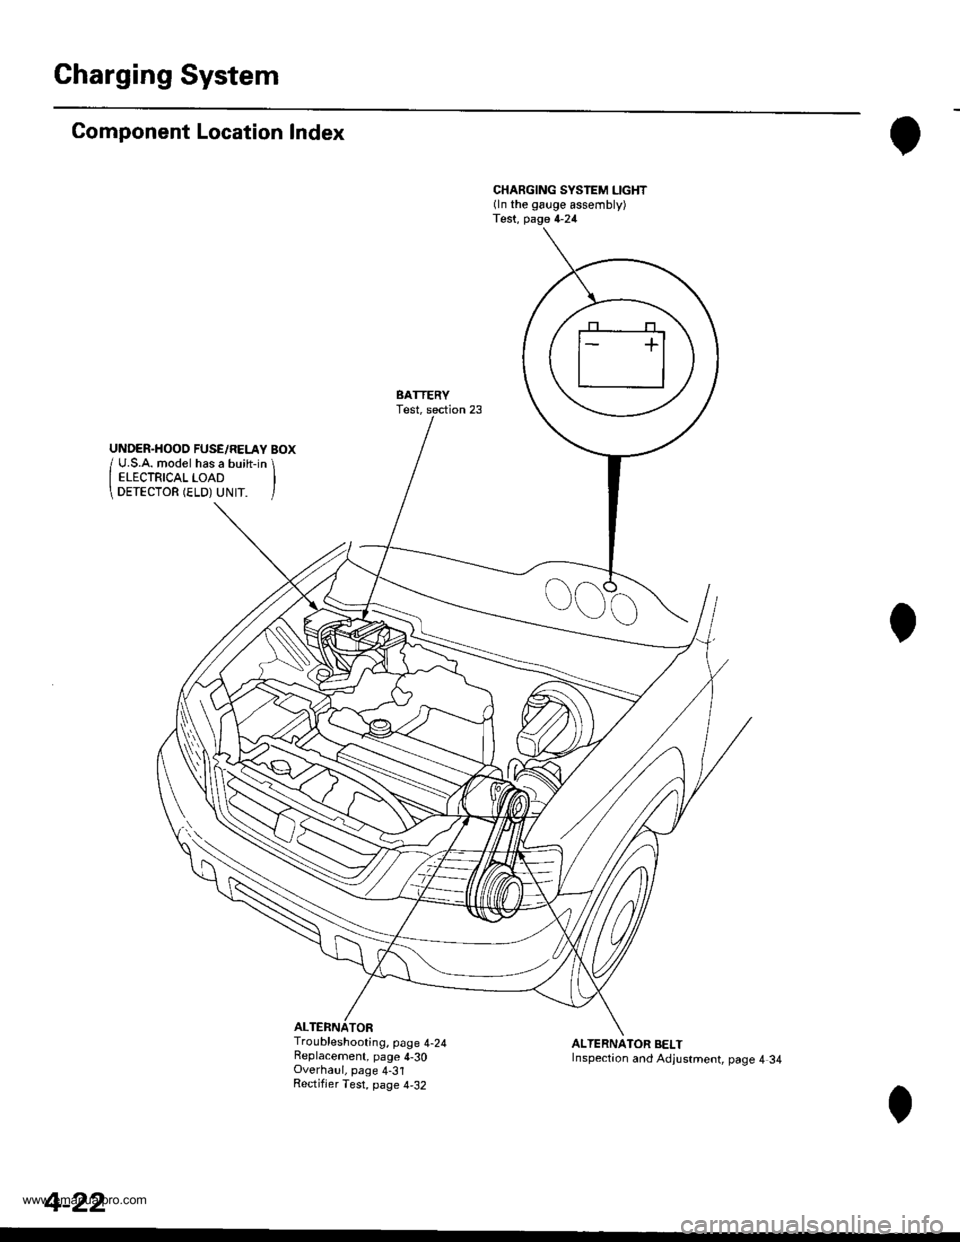 HONDA CR-V 1999 RD1-RD3 / 1.G Workshop Manual 
Charging System
Component Location Index
ALTERNATOR
CHARGING SYSTEM LIGHT(ln the gauge assembly)Test, page 4-24
BATTERYTest,
Troubleshooting, page 4-24Replacement, page 4-30Overhaul, page 4-31Rectifj